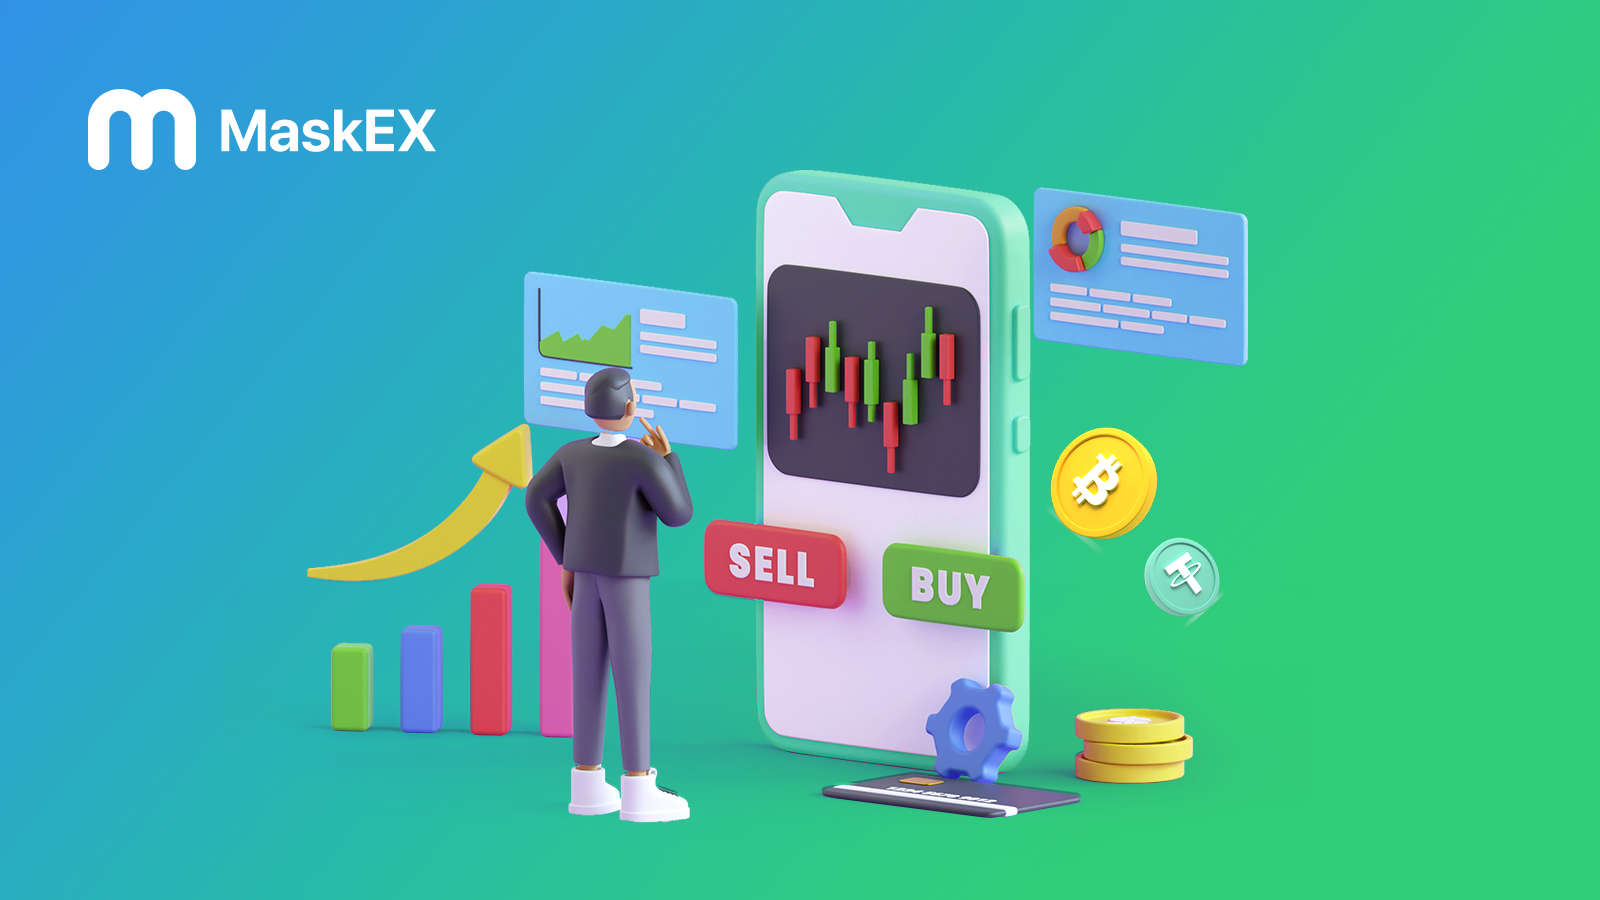 How to Buy and Sell Cryptocurrencies on MaskEX: A Step-by-Step Guide